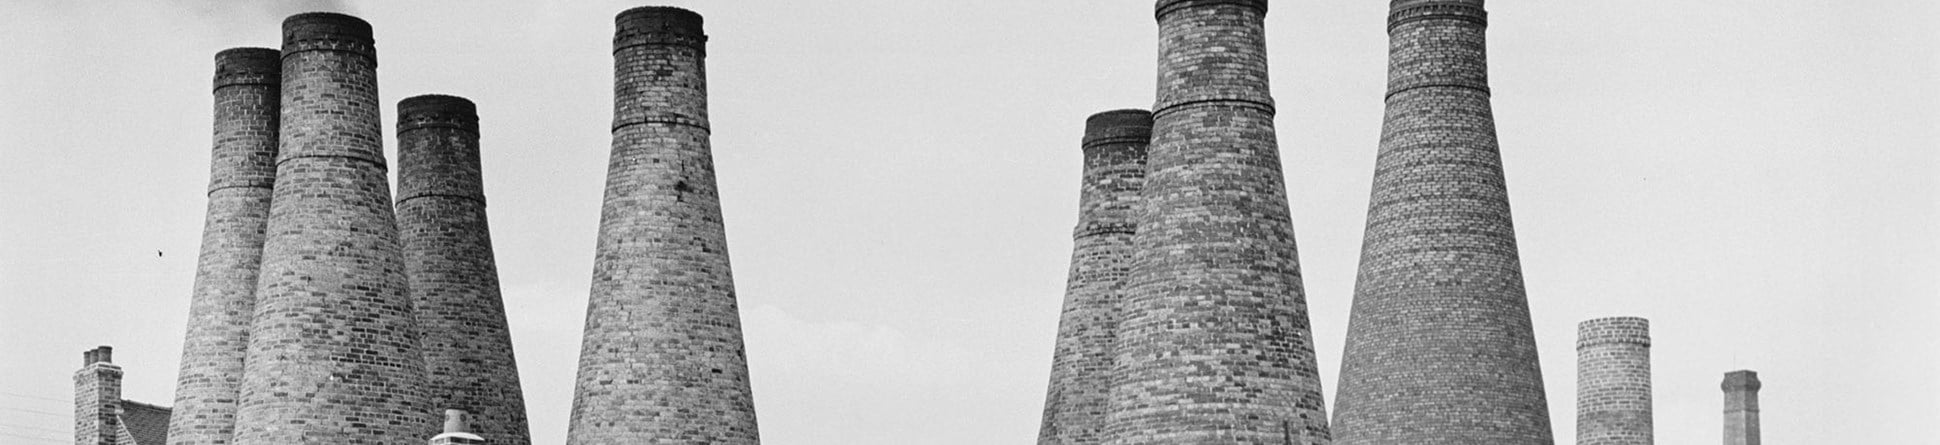 Black and white photo shows railway tracks in front of kiln chimneys